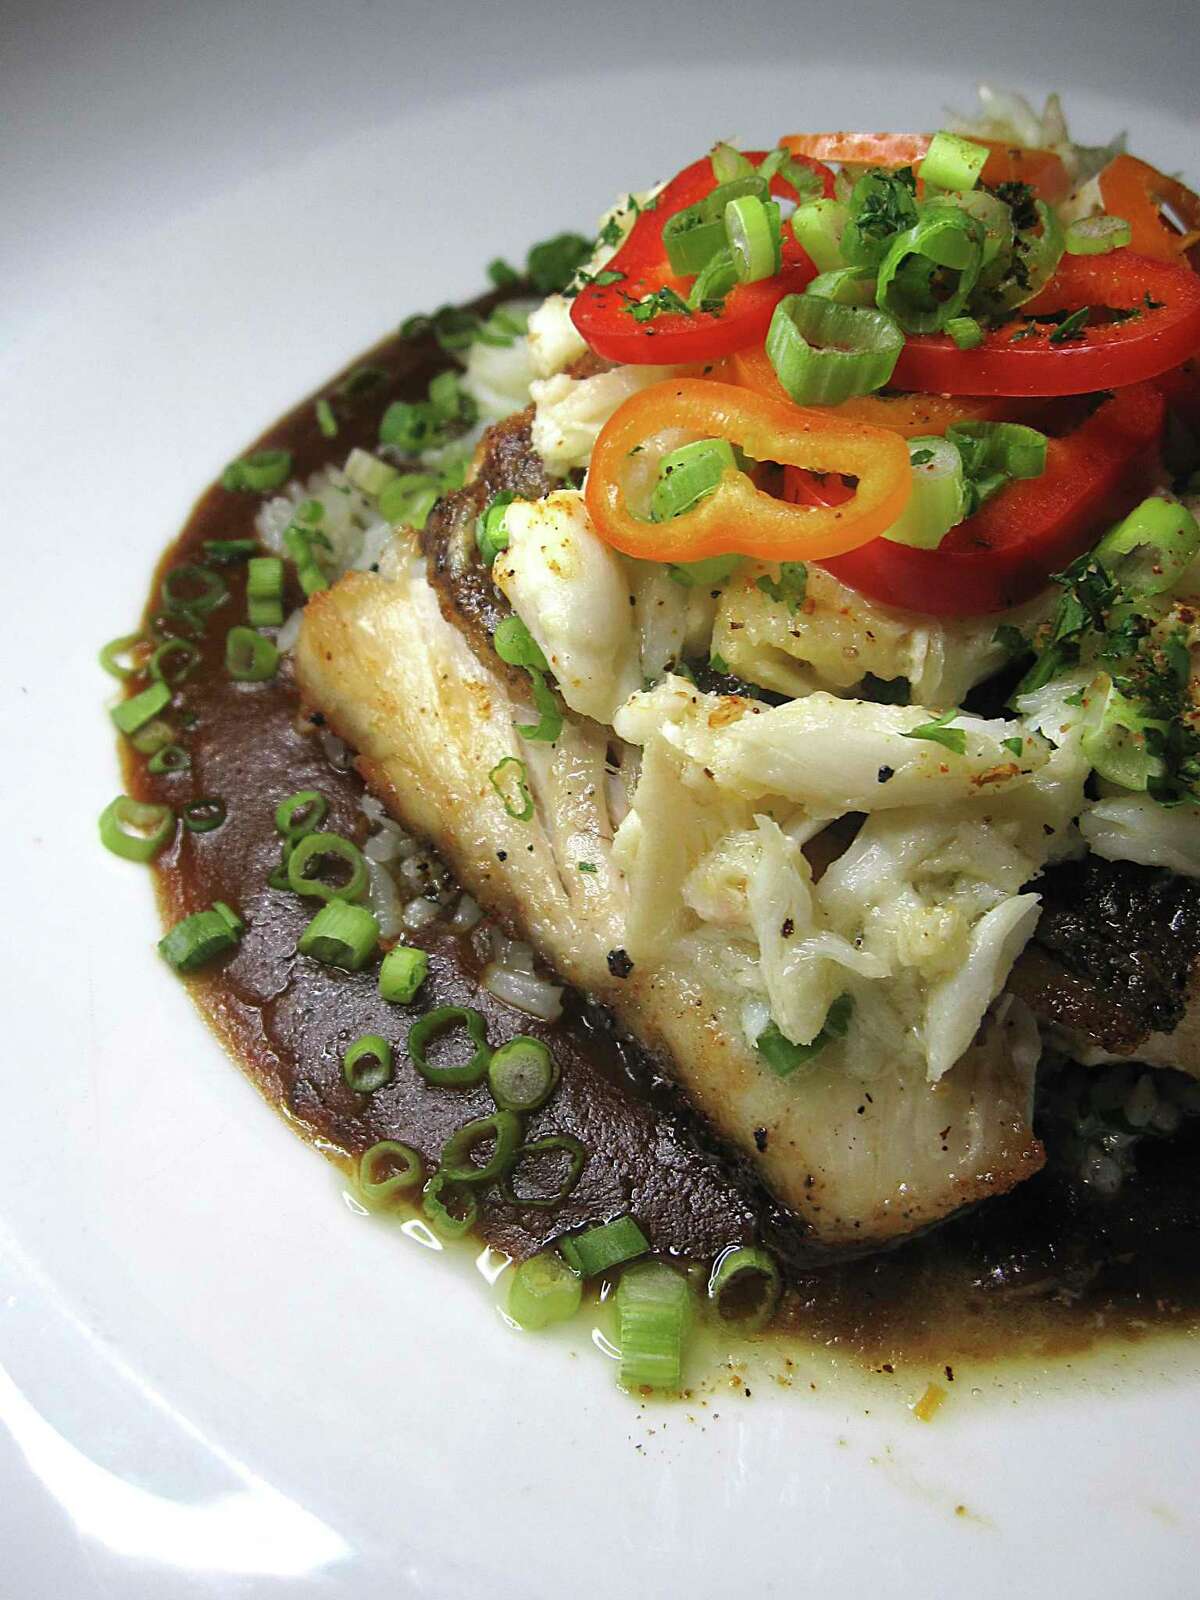 Pan-fried Gulf snapper comes with gumbo sauce and an optional dress of crab meat at Southerleigh Fine Food & Brewery at the Pearl.